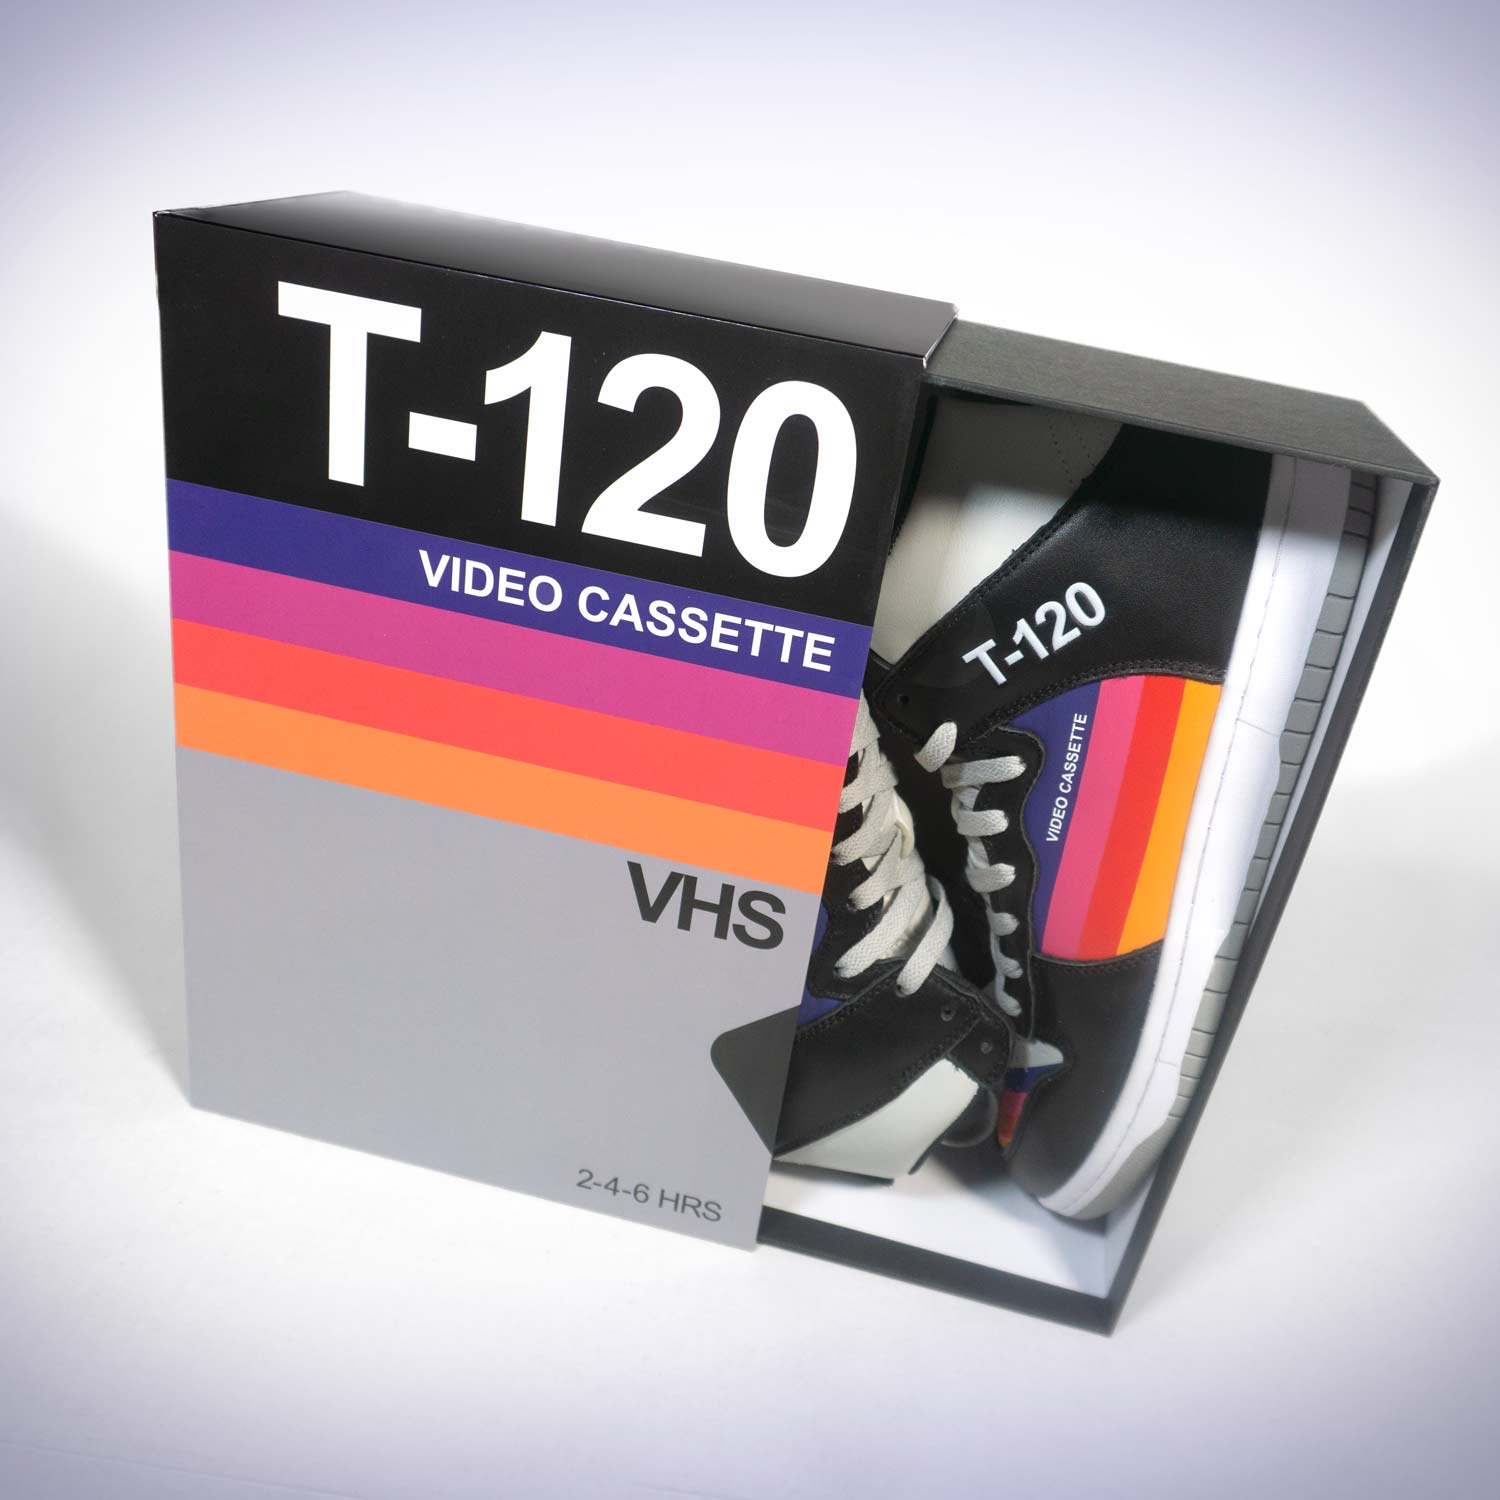 VHS Tape Shoes - Nostalgic T-120 VHS sneakers